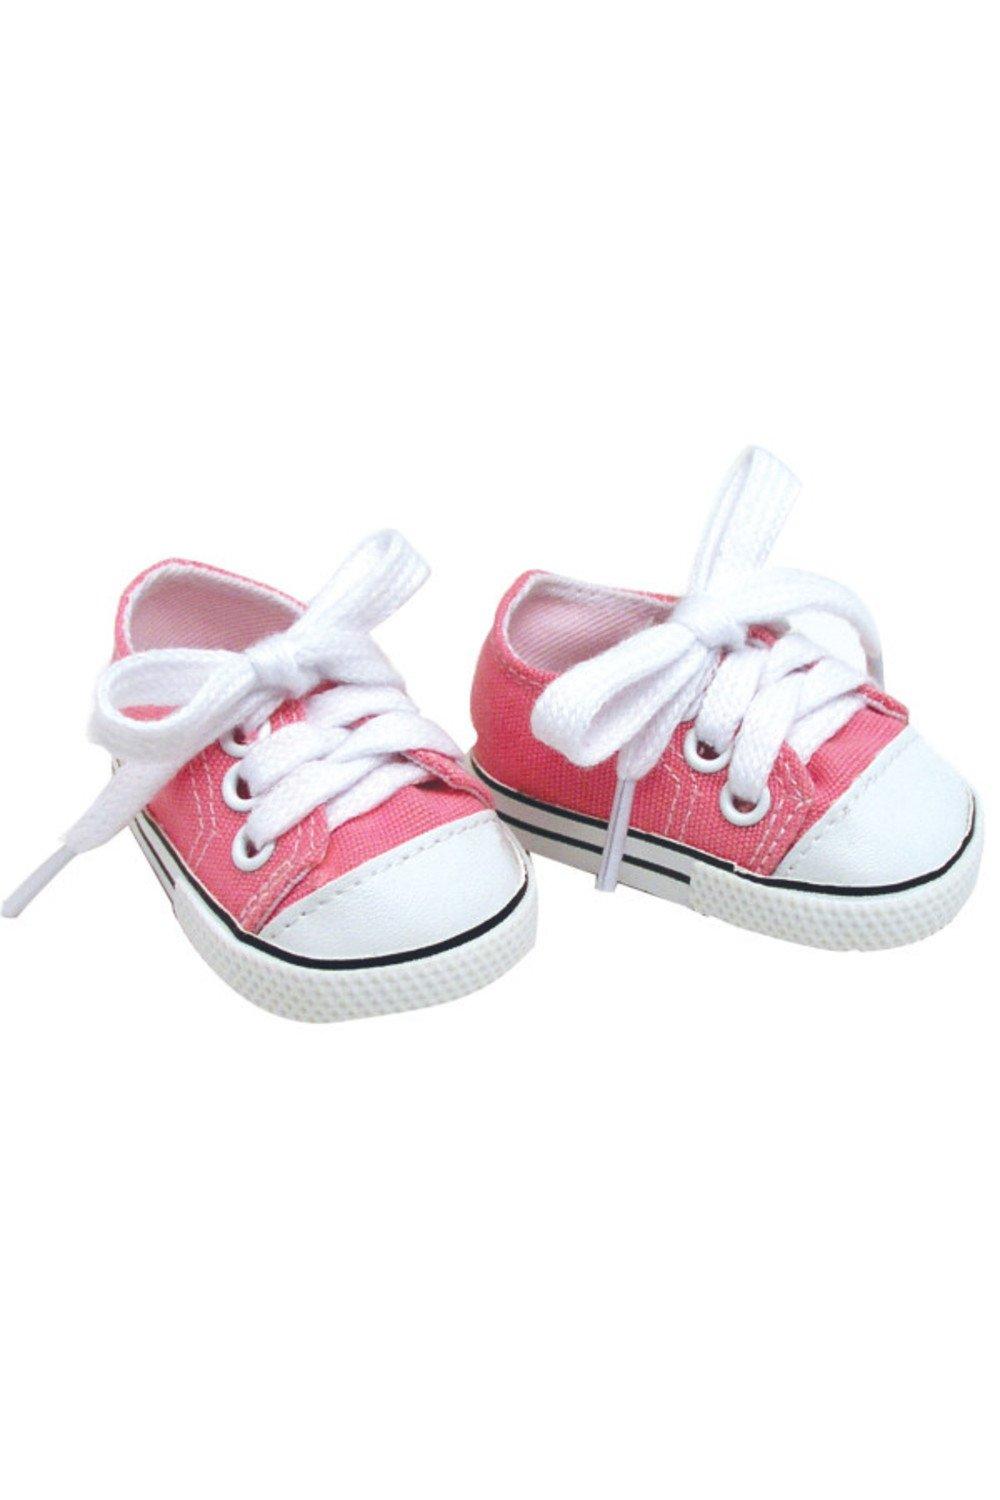 Sophia’s  18" Baby Doll Trainers with Laces, Pink Dolls Shoes